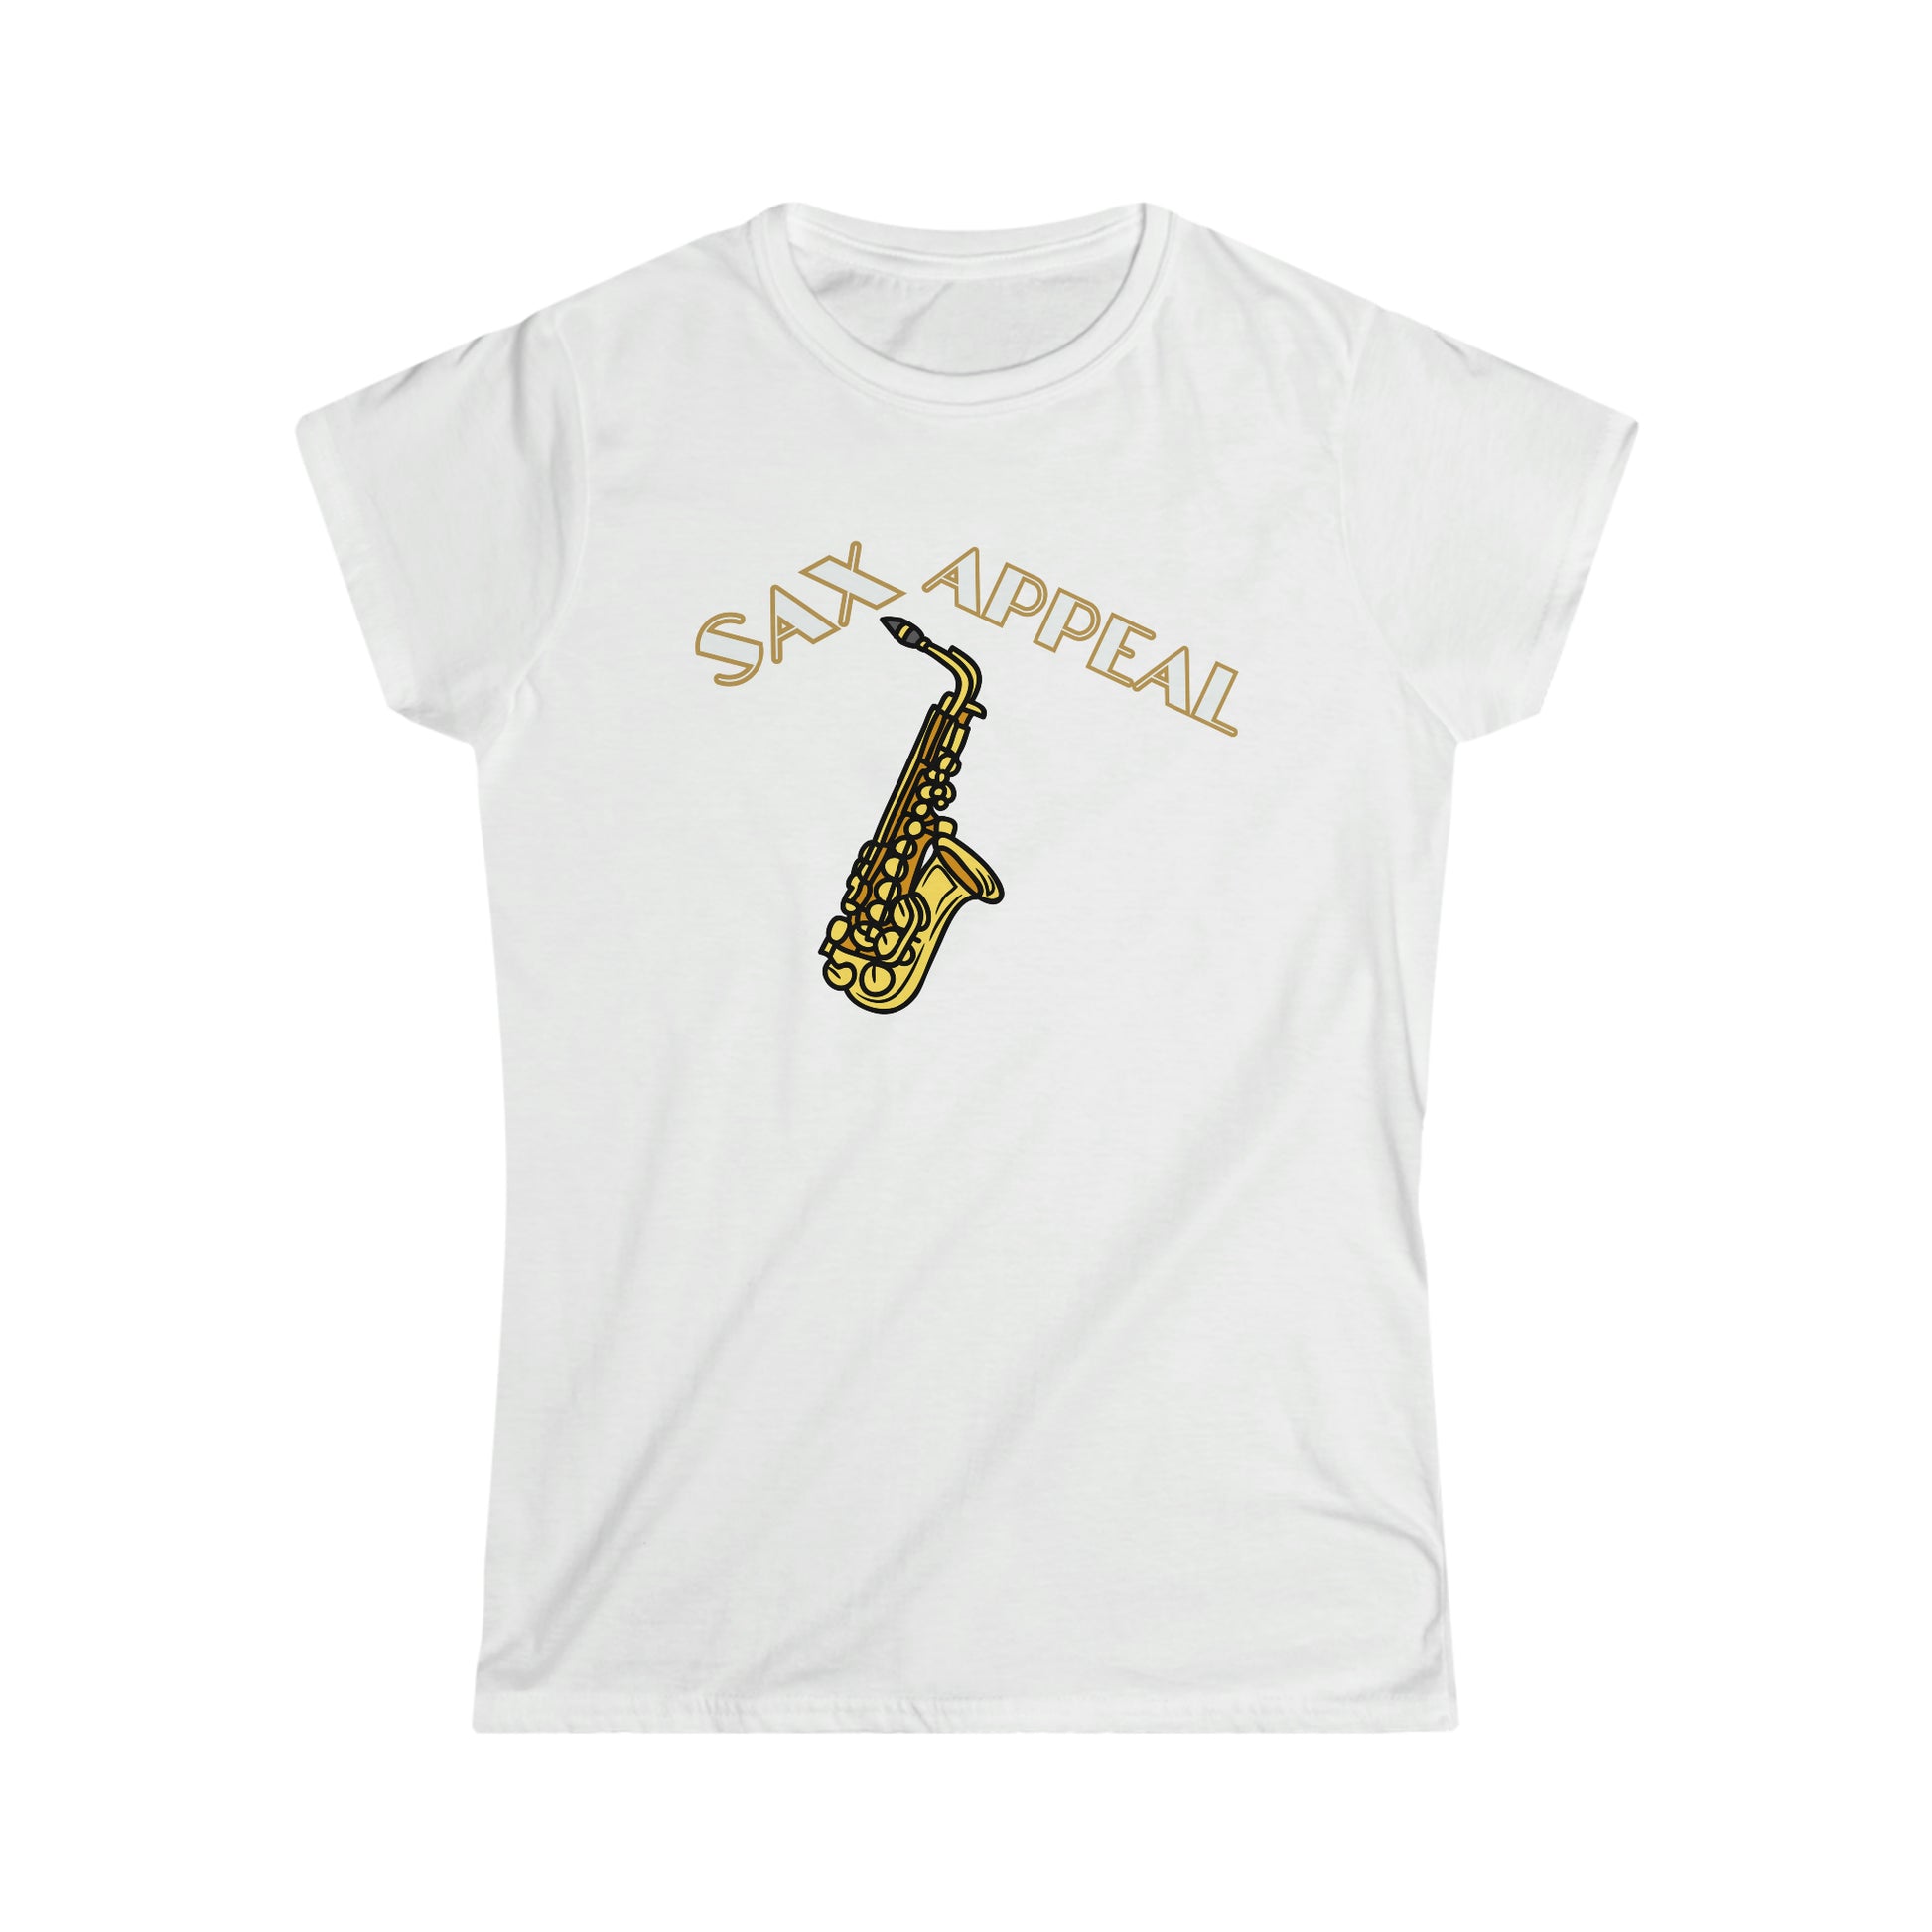 A music tshirt with the text "Sax appeal" with a retro font and a picture of saxophone. A funny jazz music tshirt!